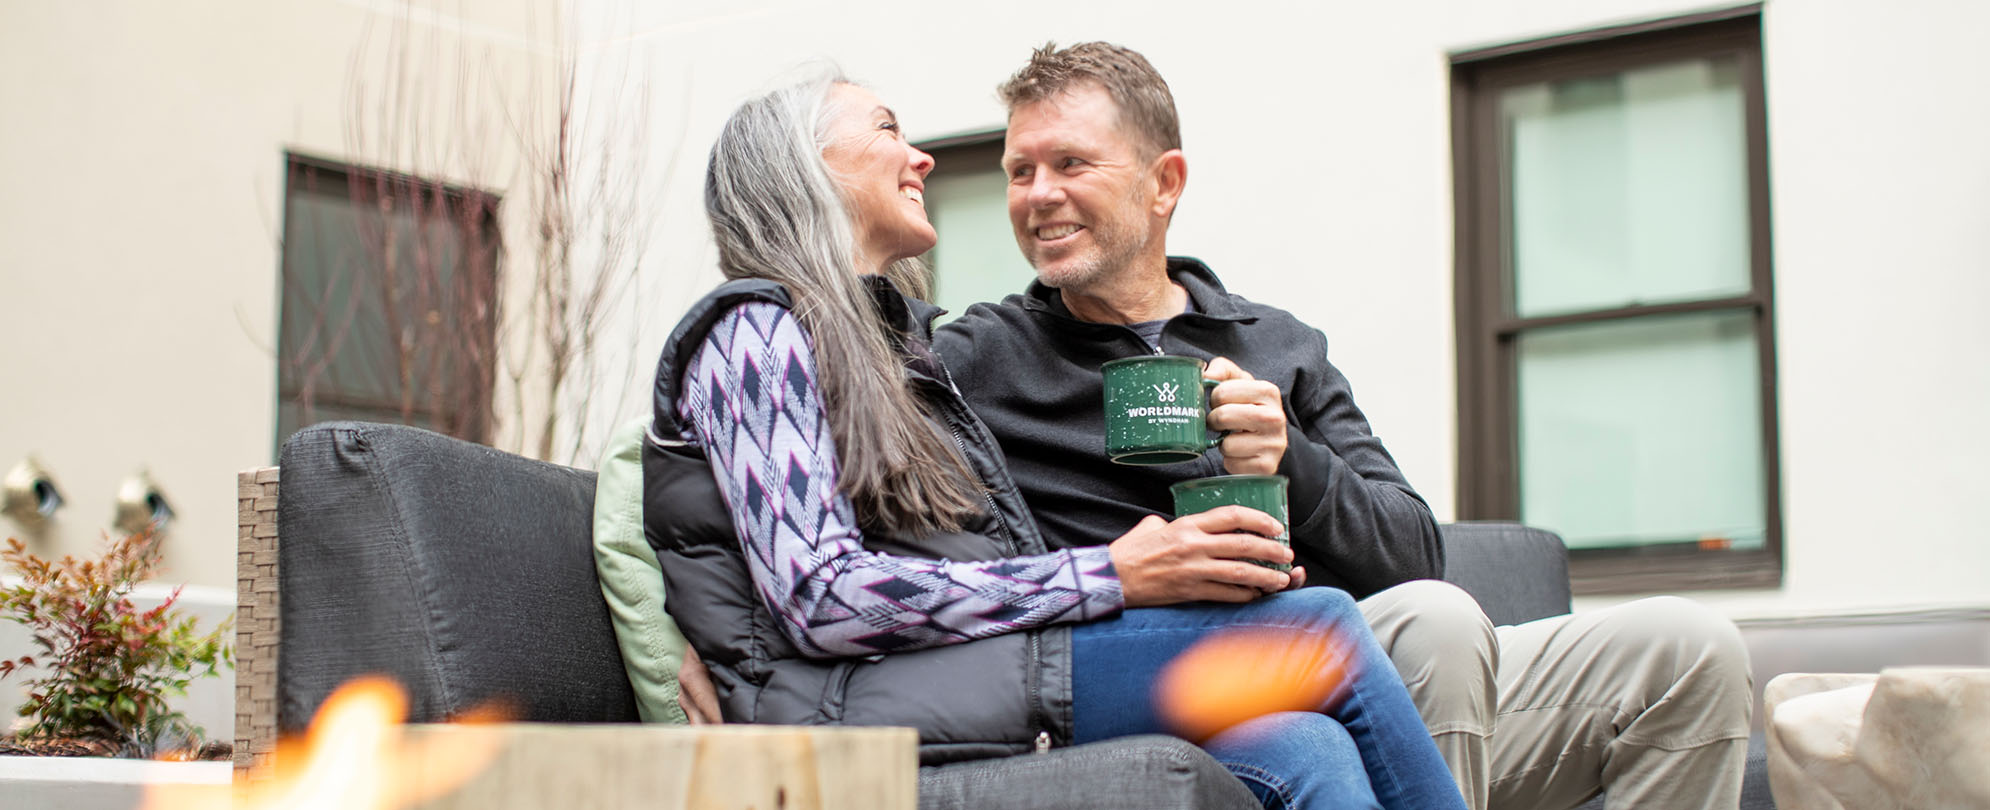 A man and woman holding WorldMark coffee mugs sit on an outdoor couch smiling at each other.